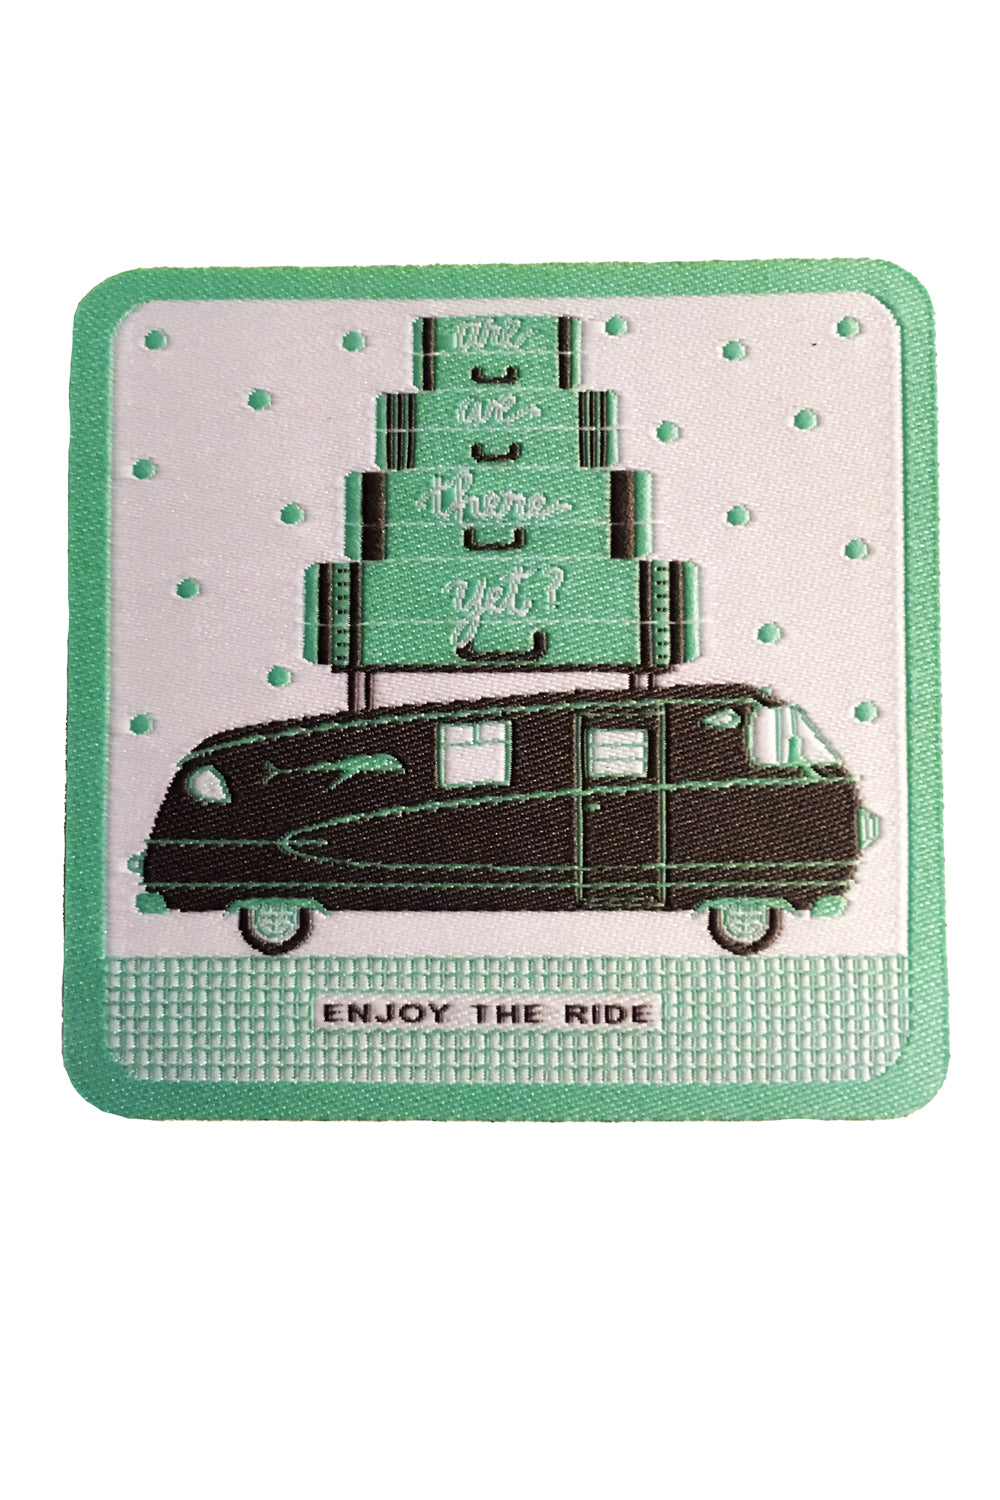 Are We There Yet Patch in Grey & Mint